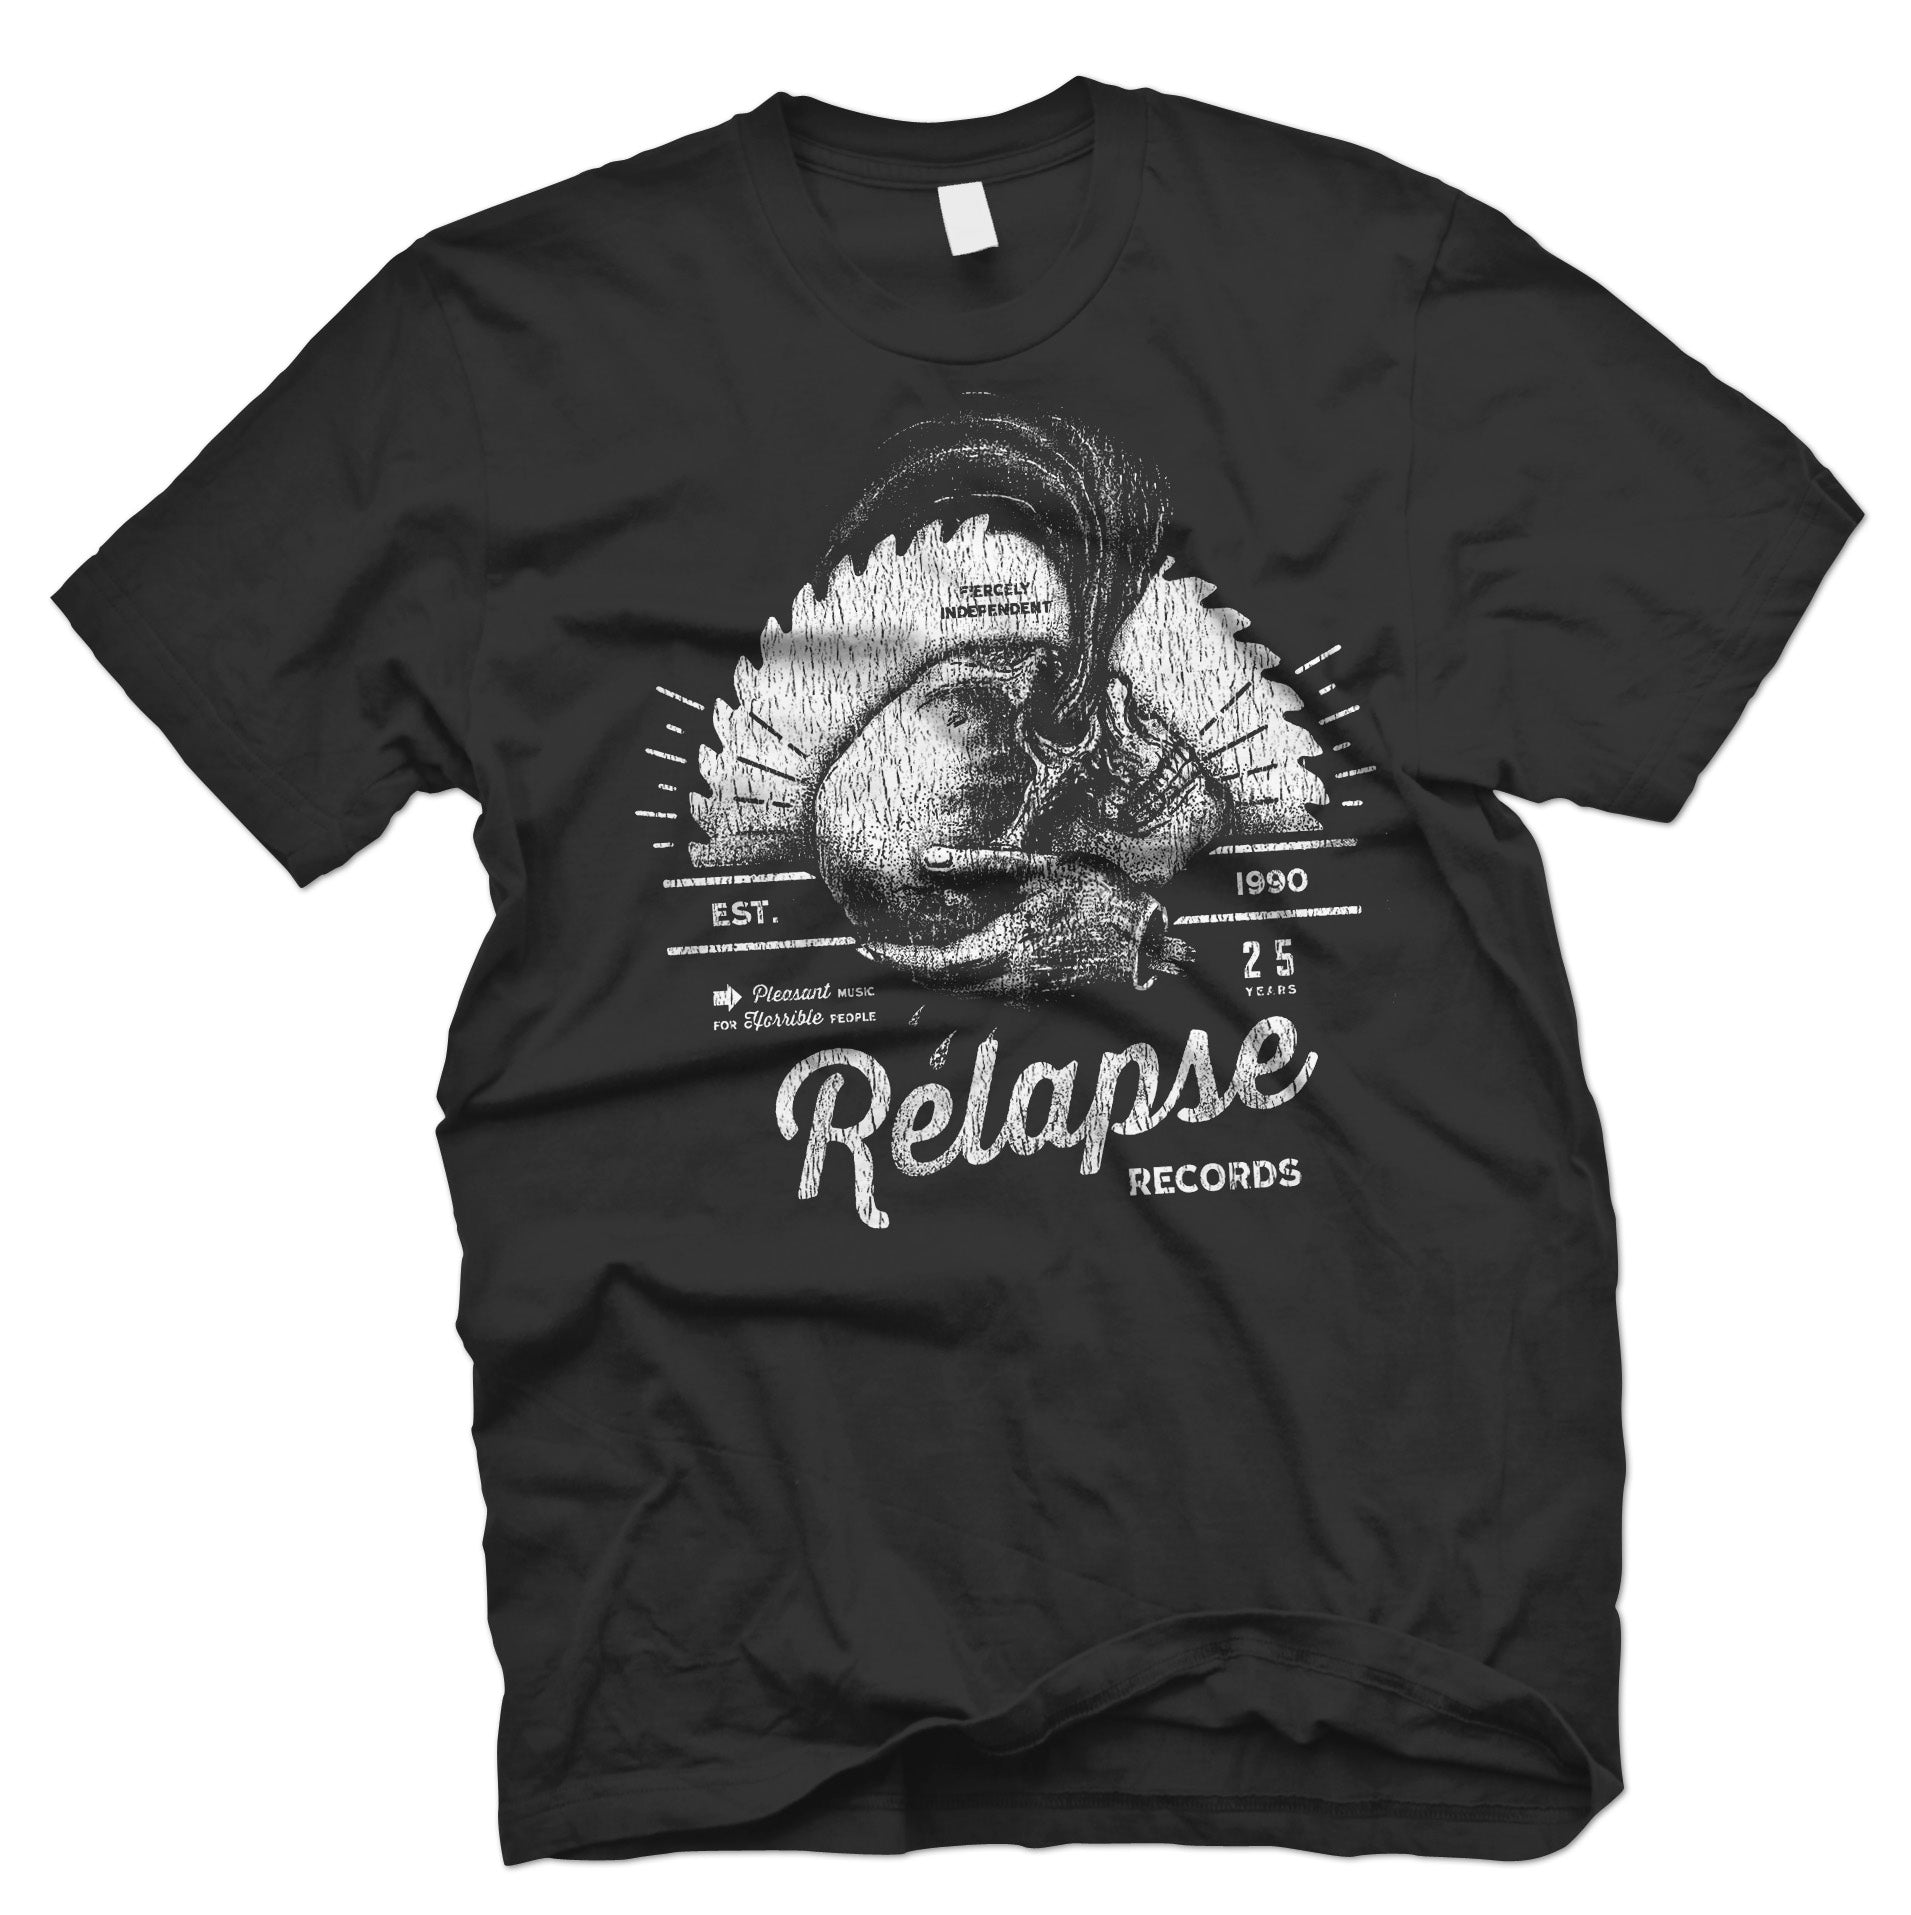 Relapse Records "Hand of Doom" T-Shirt